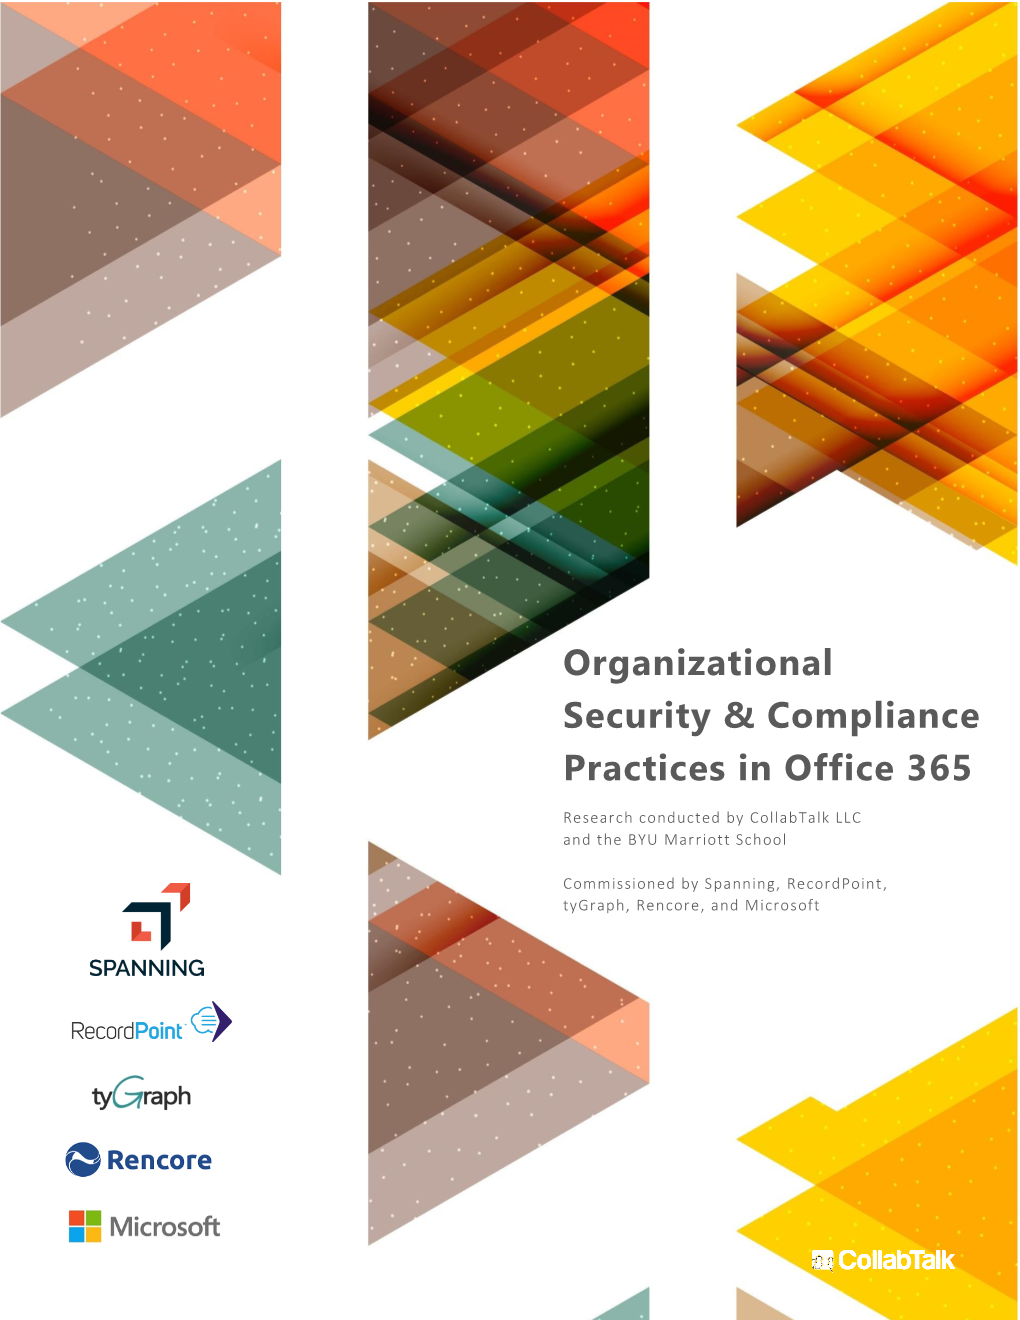 Organizational Security & Compliance Practices in Office